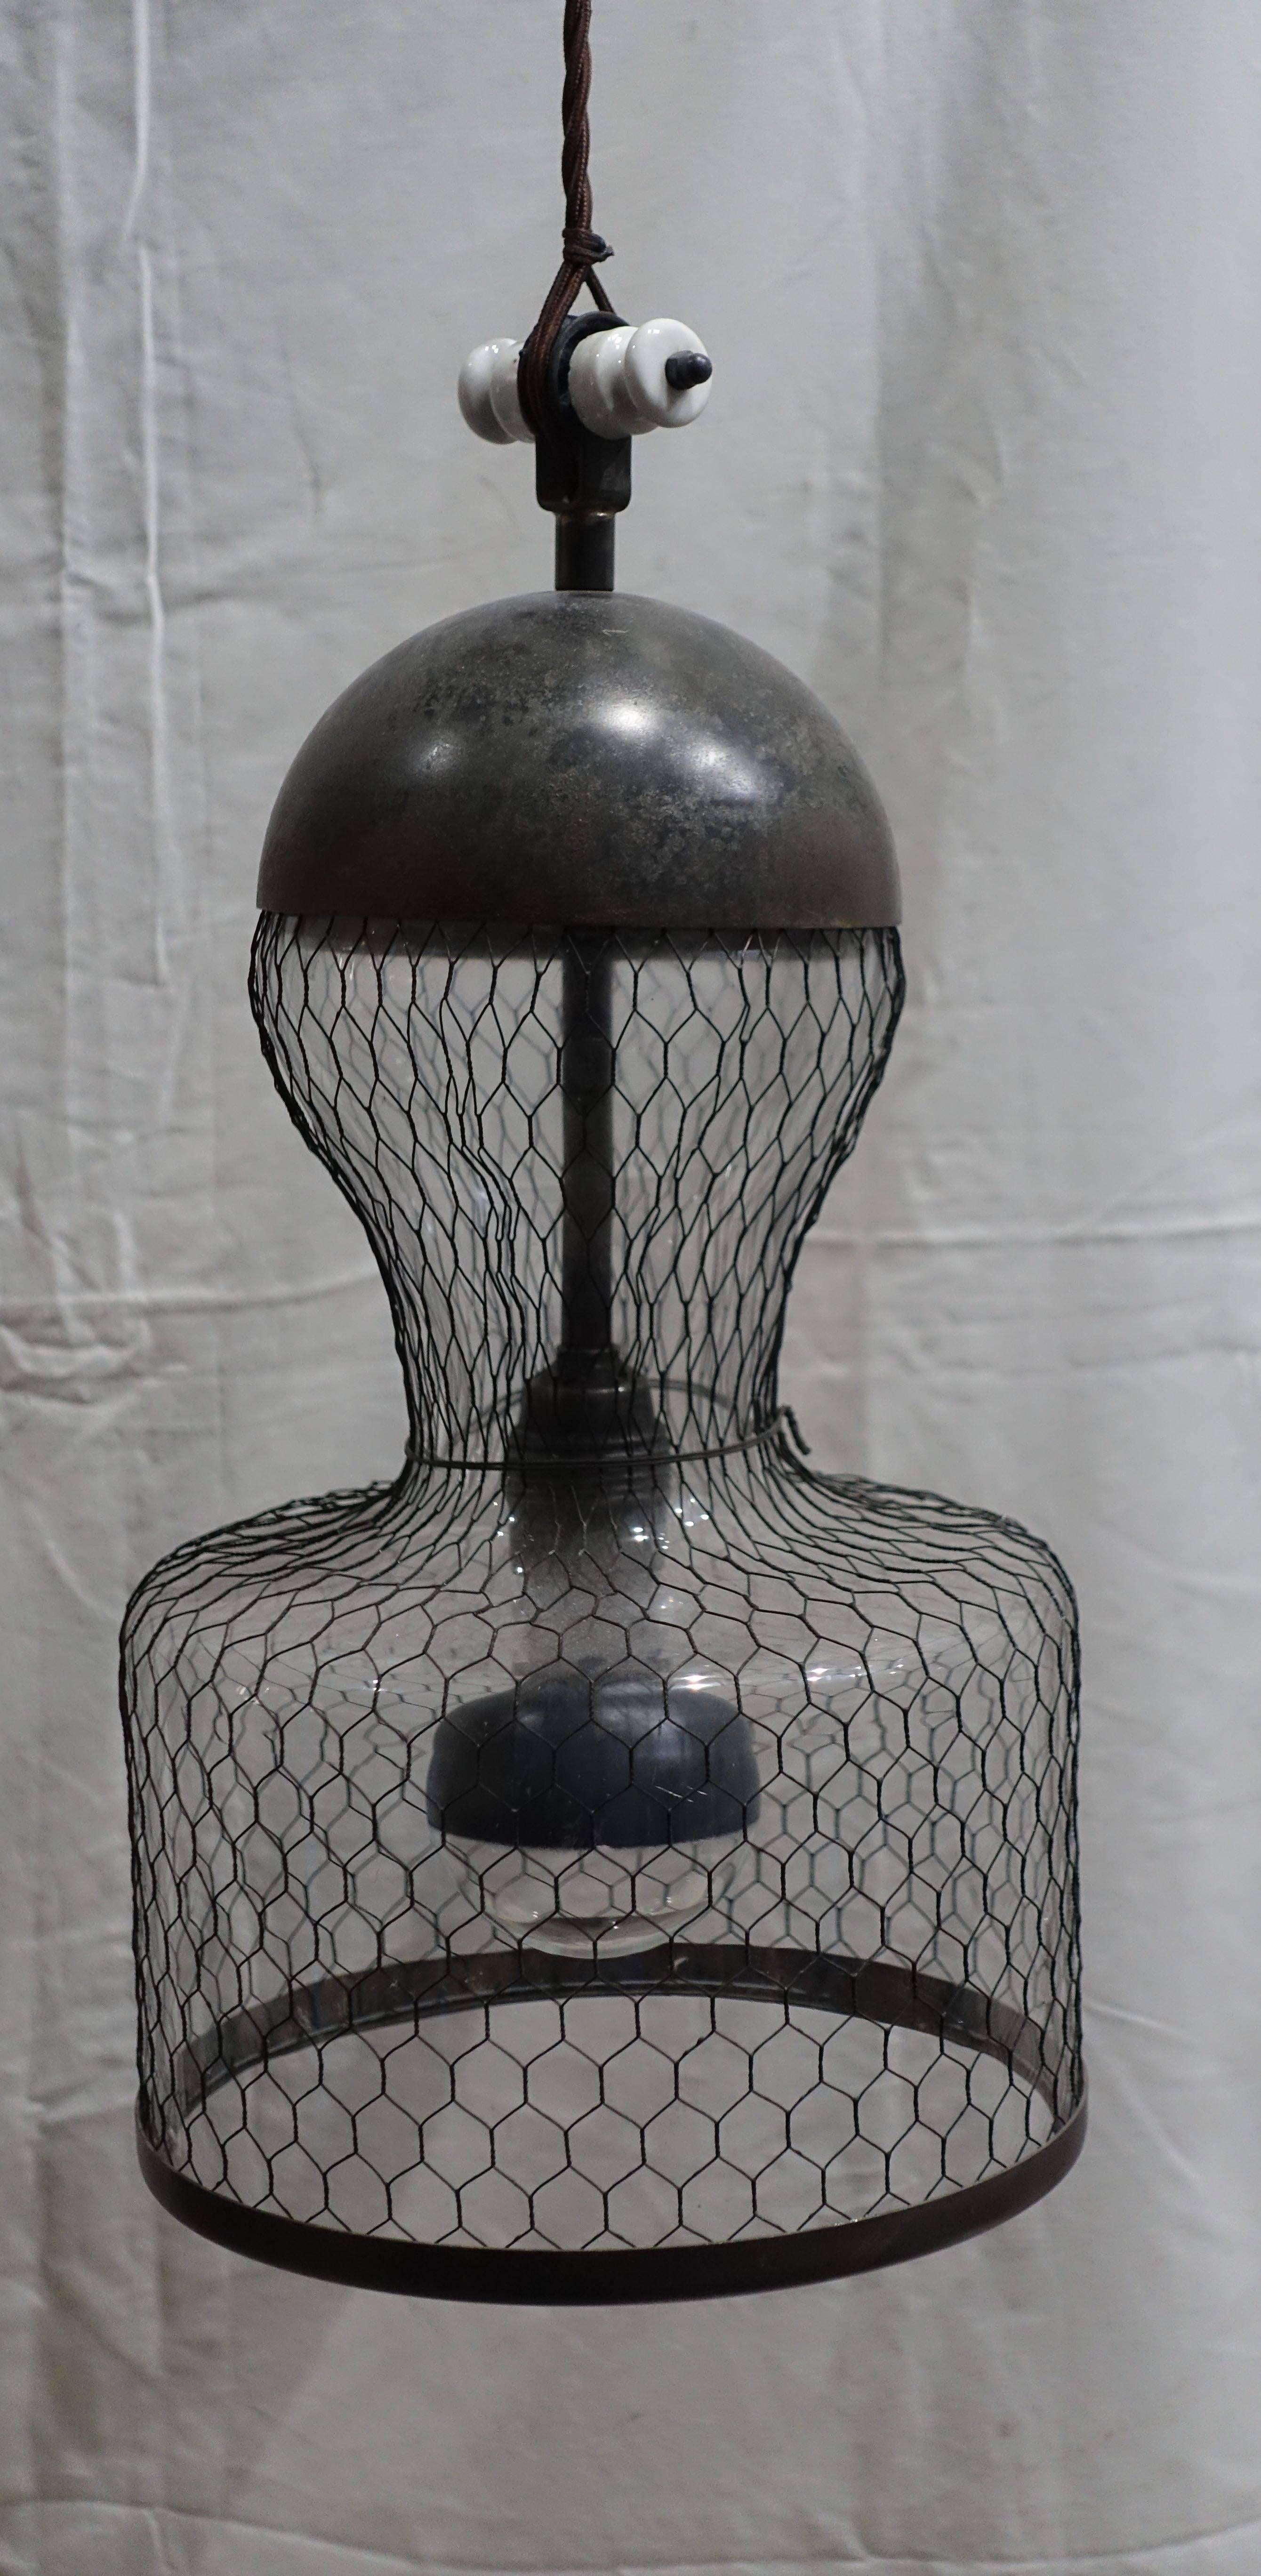 Italian Industrial Pair of Mesh Covered Light Fixtures, Italy, Contemporary Design